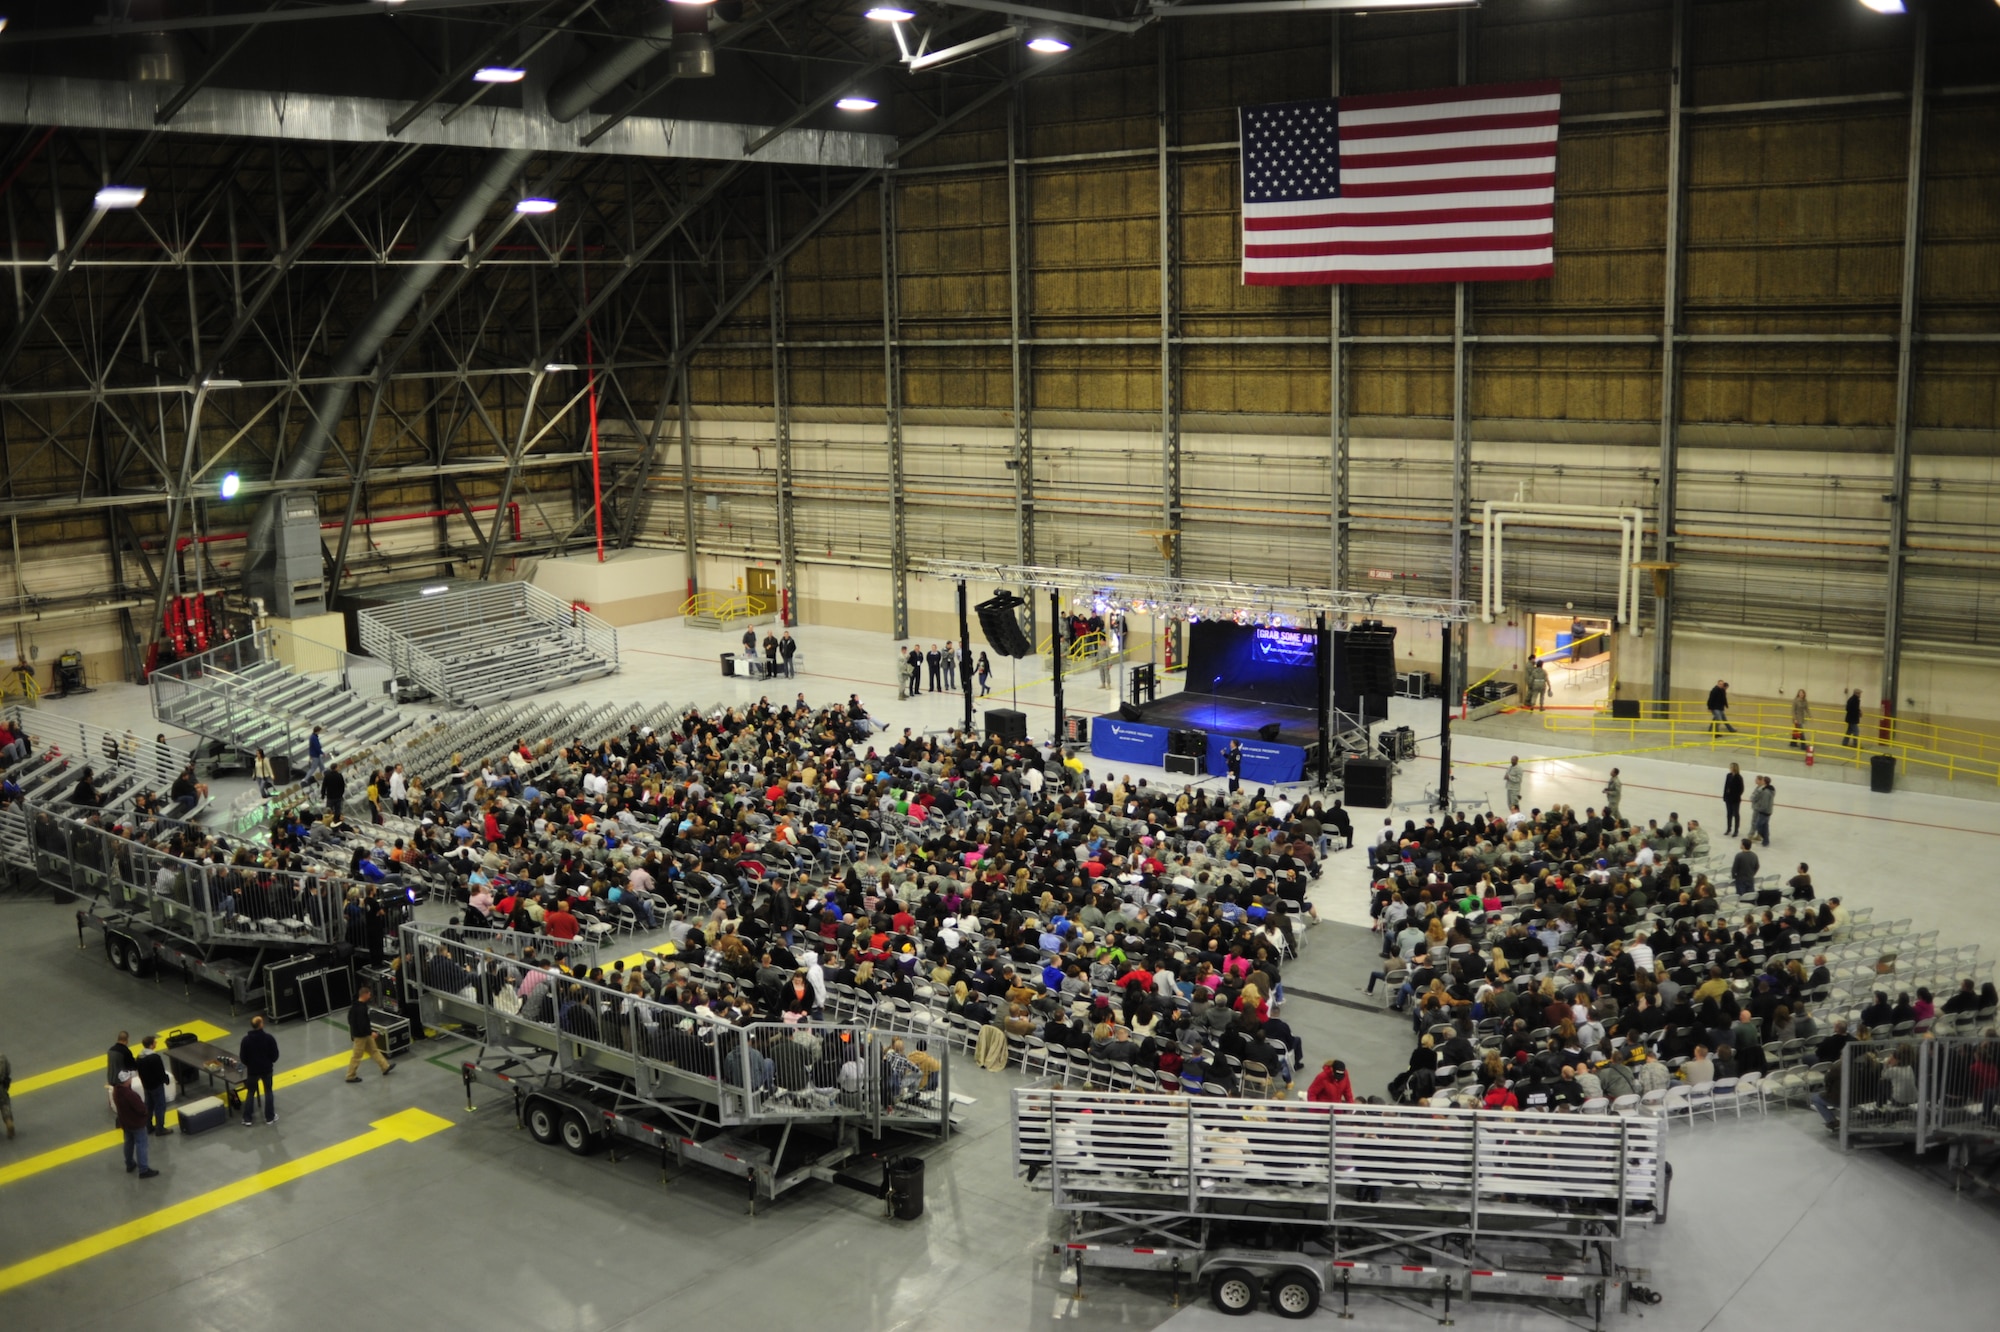 The crowd of more than 2,000 fans find their seats in preparation for the comedic performance of Carlos Mencia, the man behind Comedy Central's popular "Mind of Mencia" television program, Nov. 19. at McChord Field, Joint Base Lewis-McChord, Wash. (U.S. Air Force photo/Airman Leah Young)